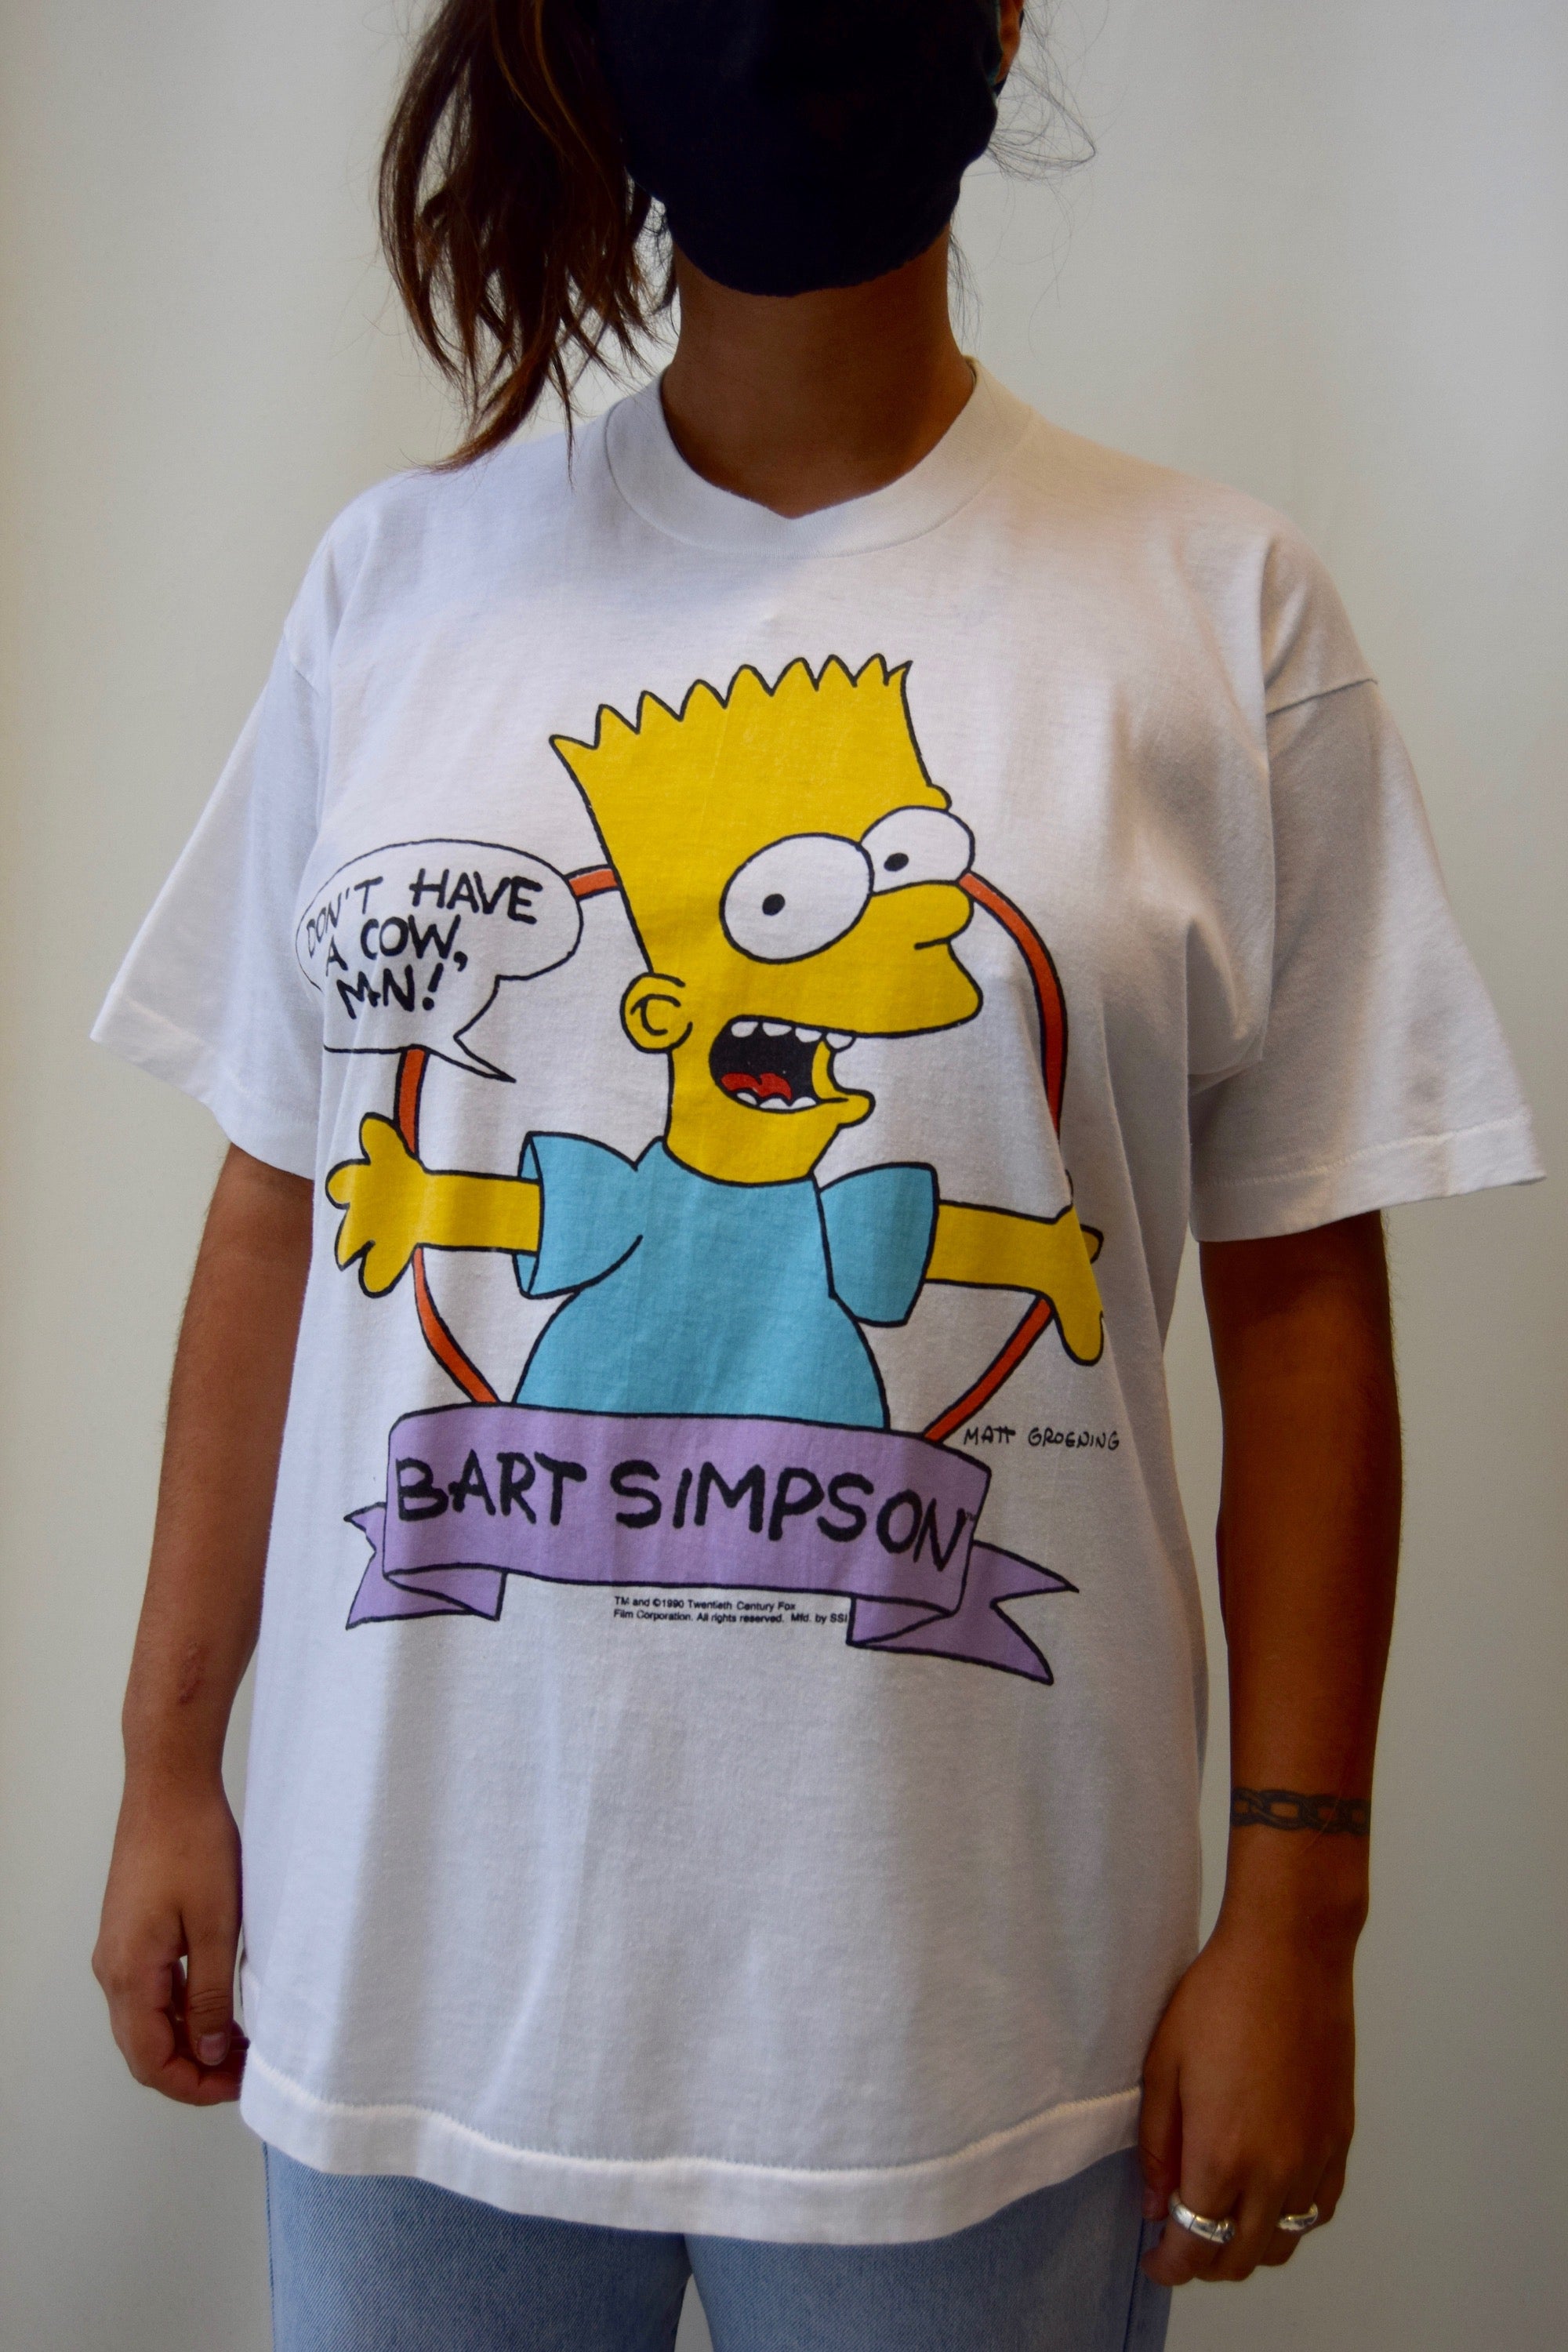 1990 Bart Simpson "Don't Have A Cow, Man!" T-Shirt